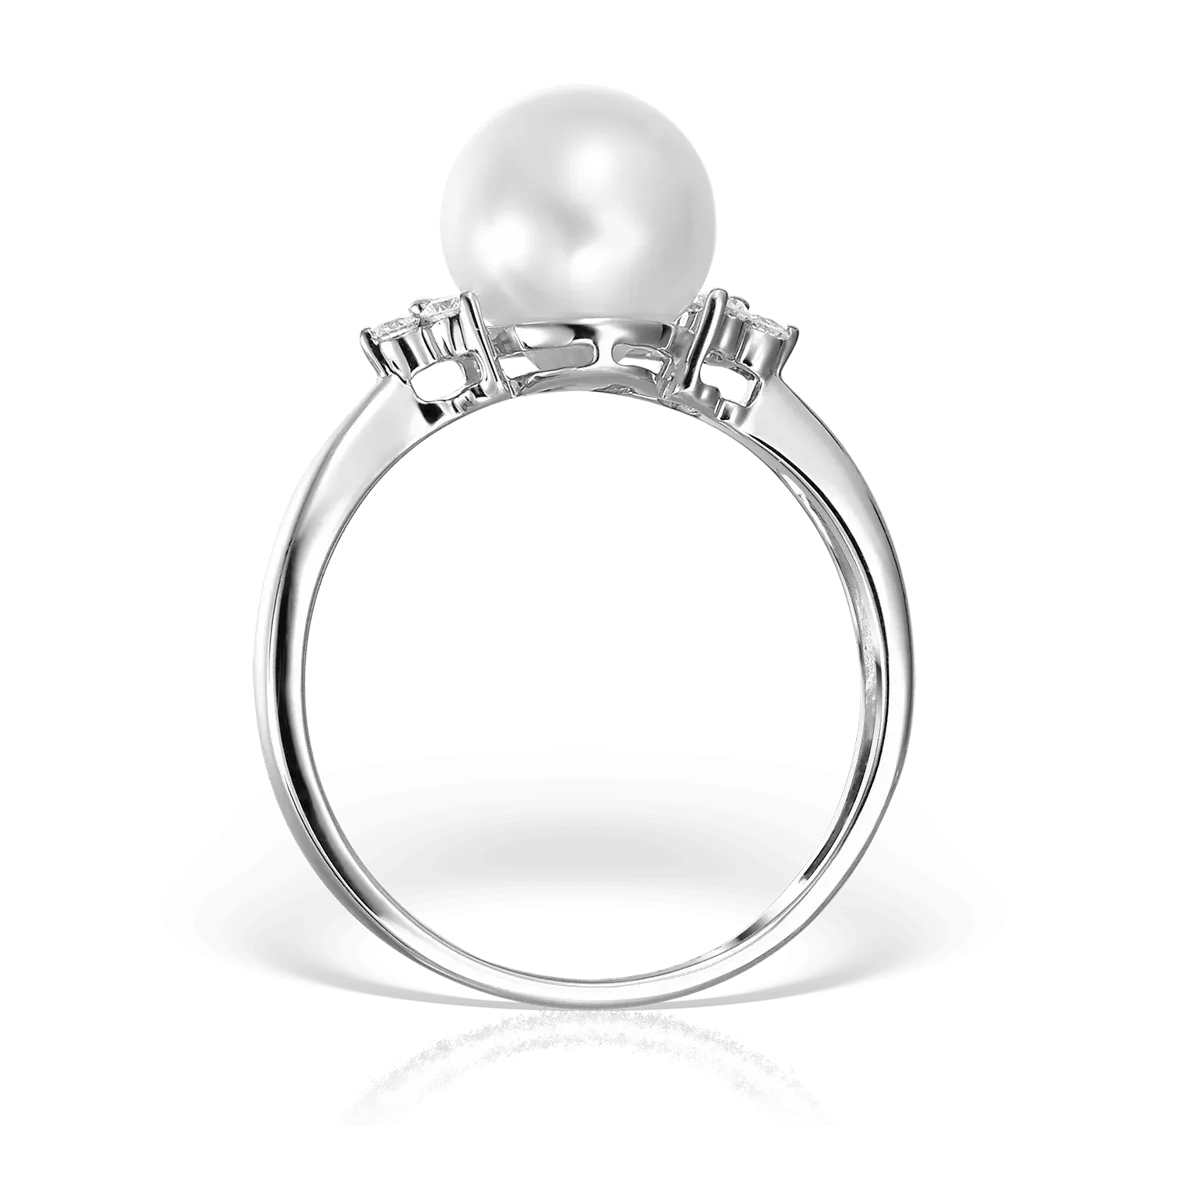 14K white gold ring with 7.5ct fresh water cultured pearls and 0.09ct diamonds